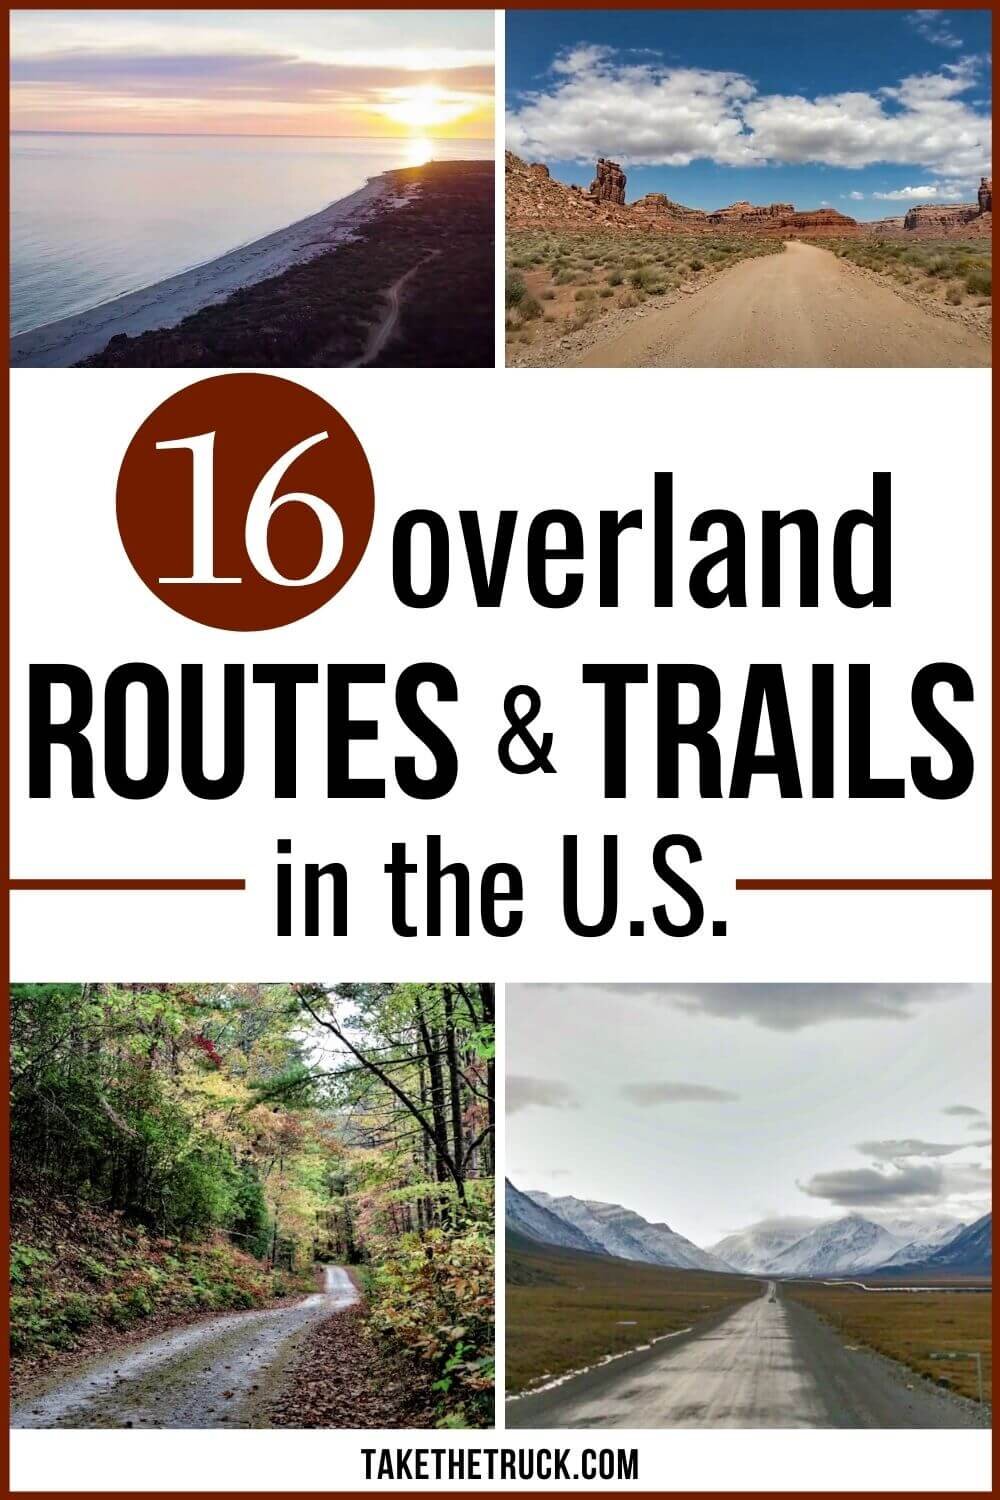 Off road trails and overlanding routes to improve your 4x4 &amp; overland travel skills! From overlanding road trips to difficult overlanding routes &amp; off road trails, there’s something for you!